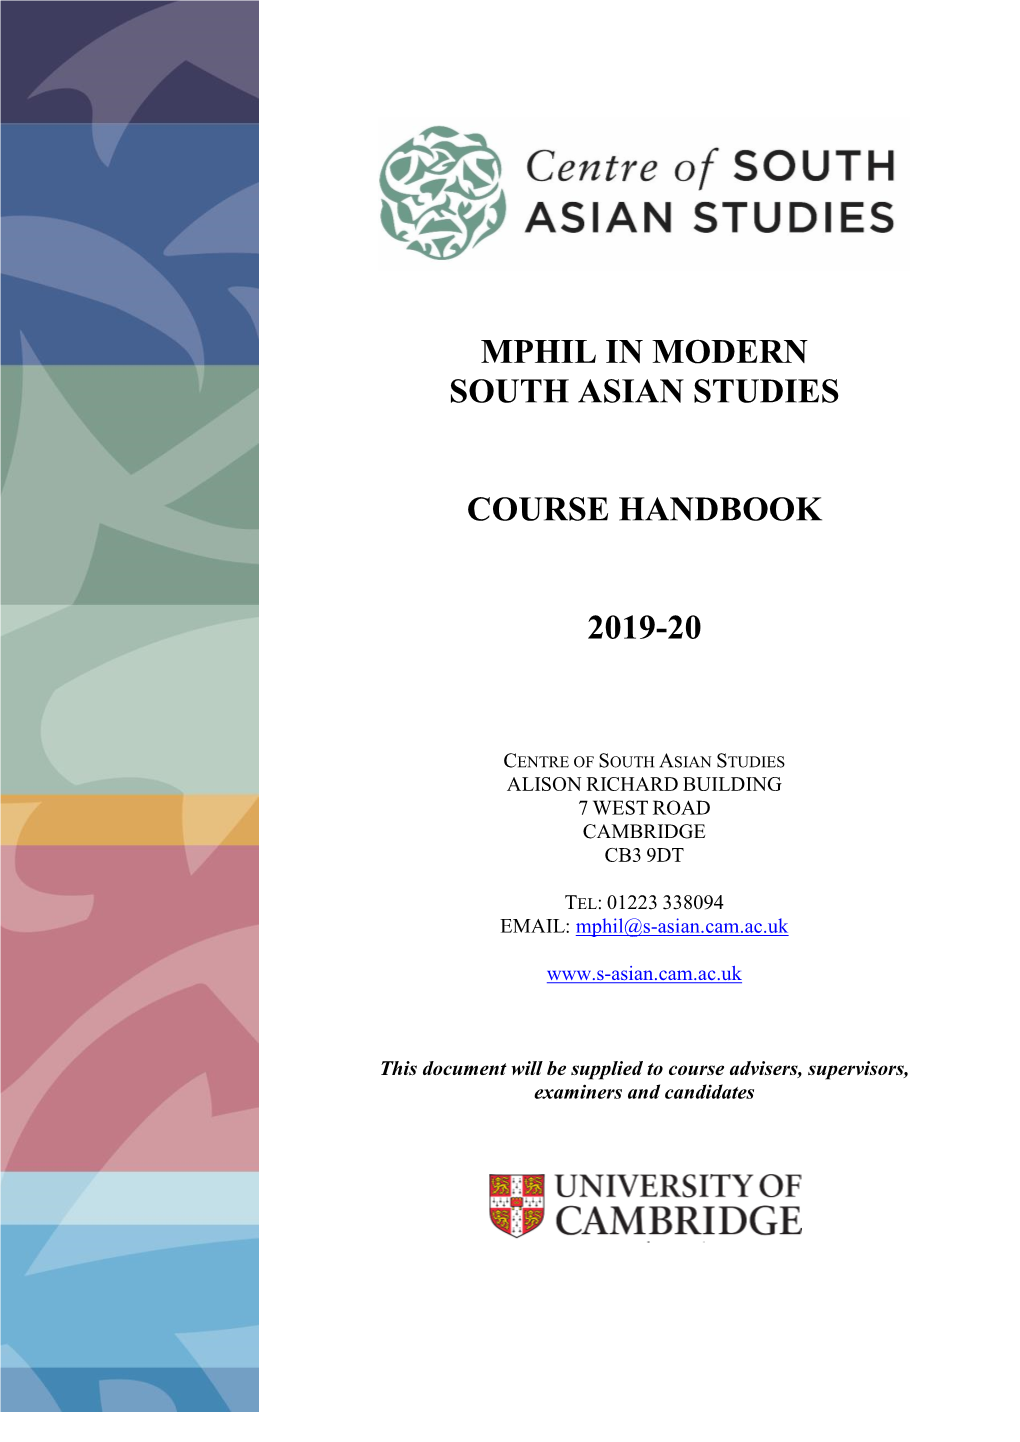 Mphil in Modern South Asian Studies Course Handbook 2019-2020 Is Correct at the Time of Publication but May Be Subject to Alteration at Any Time